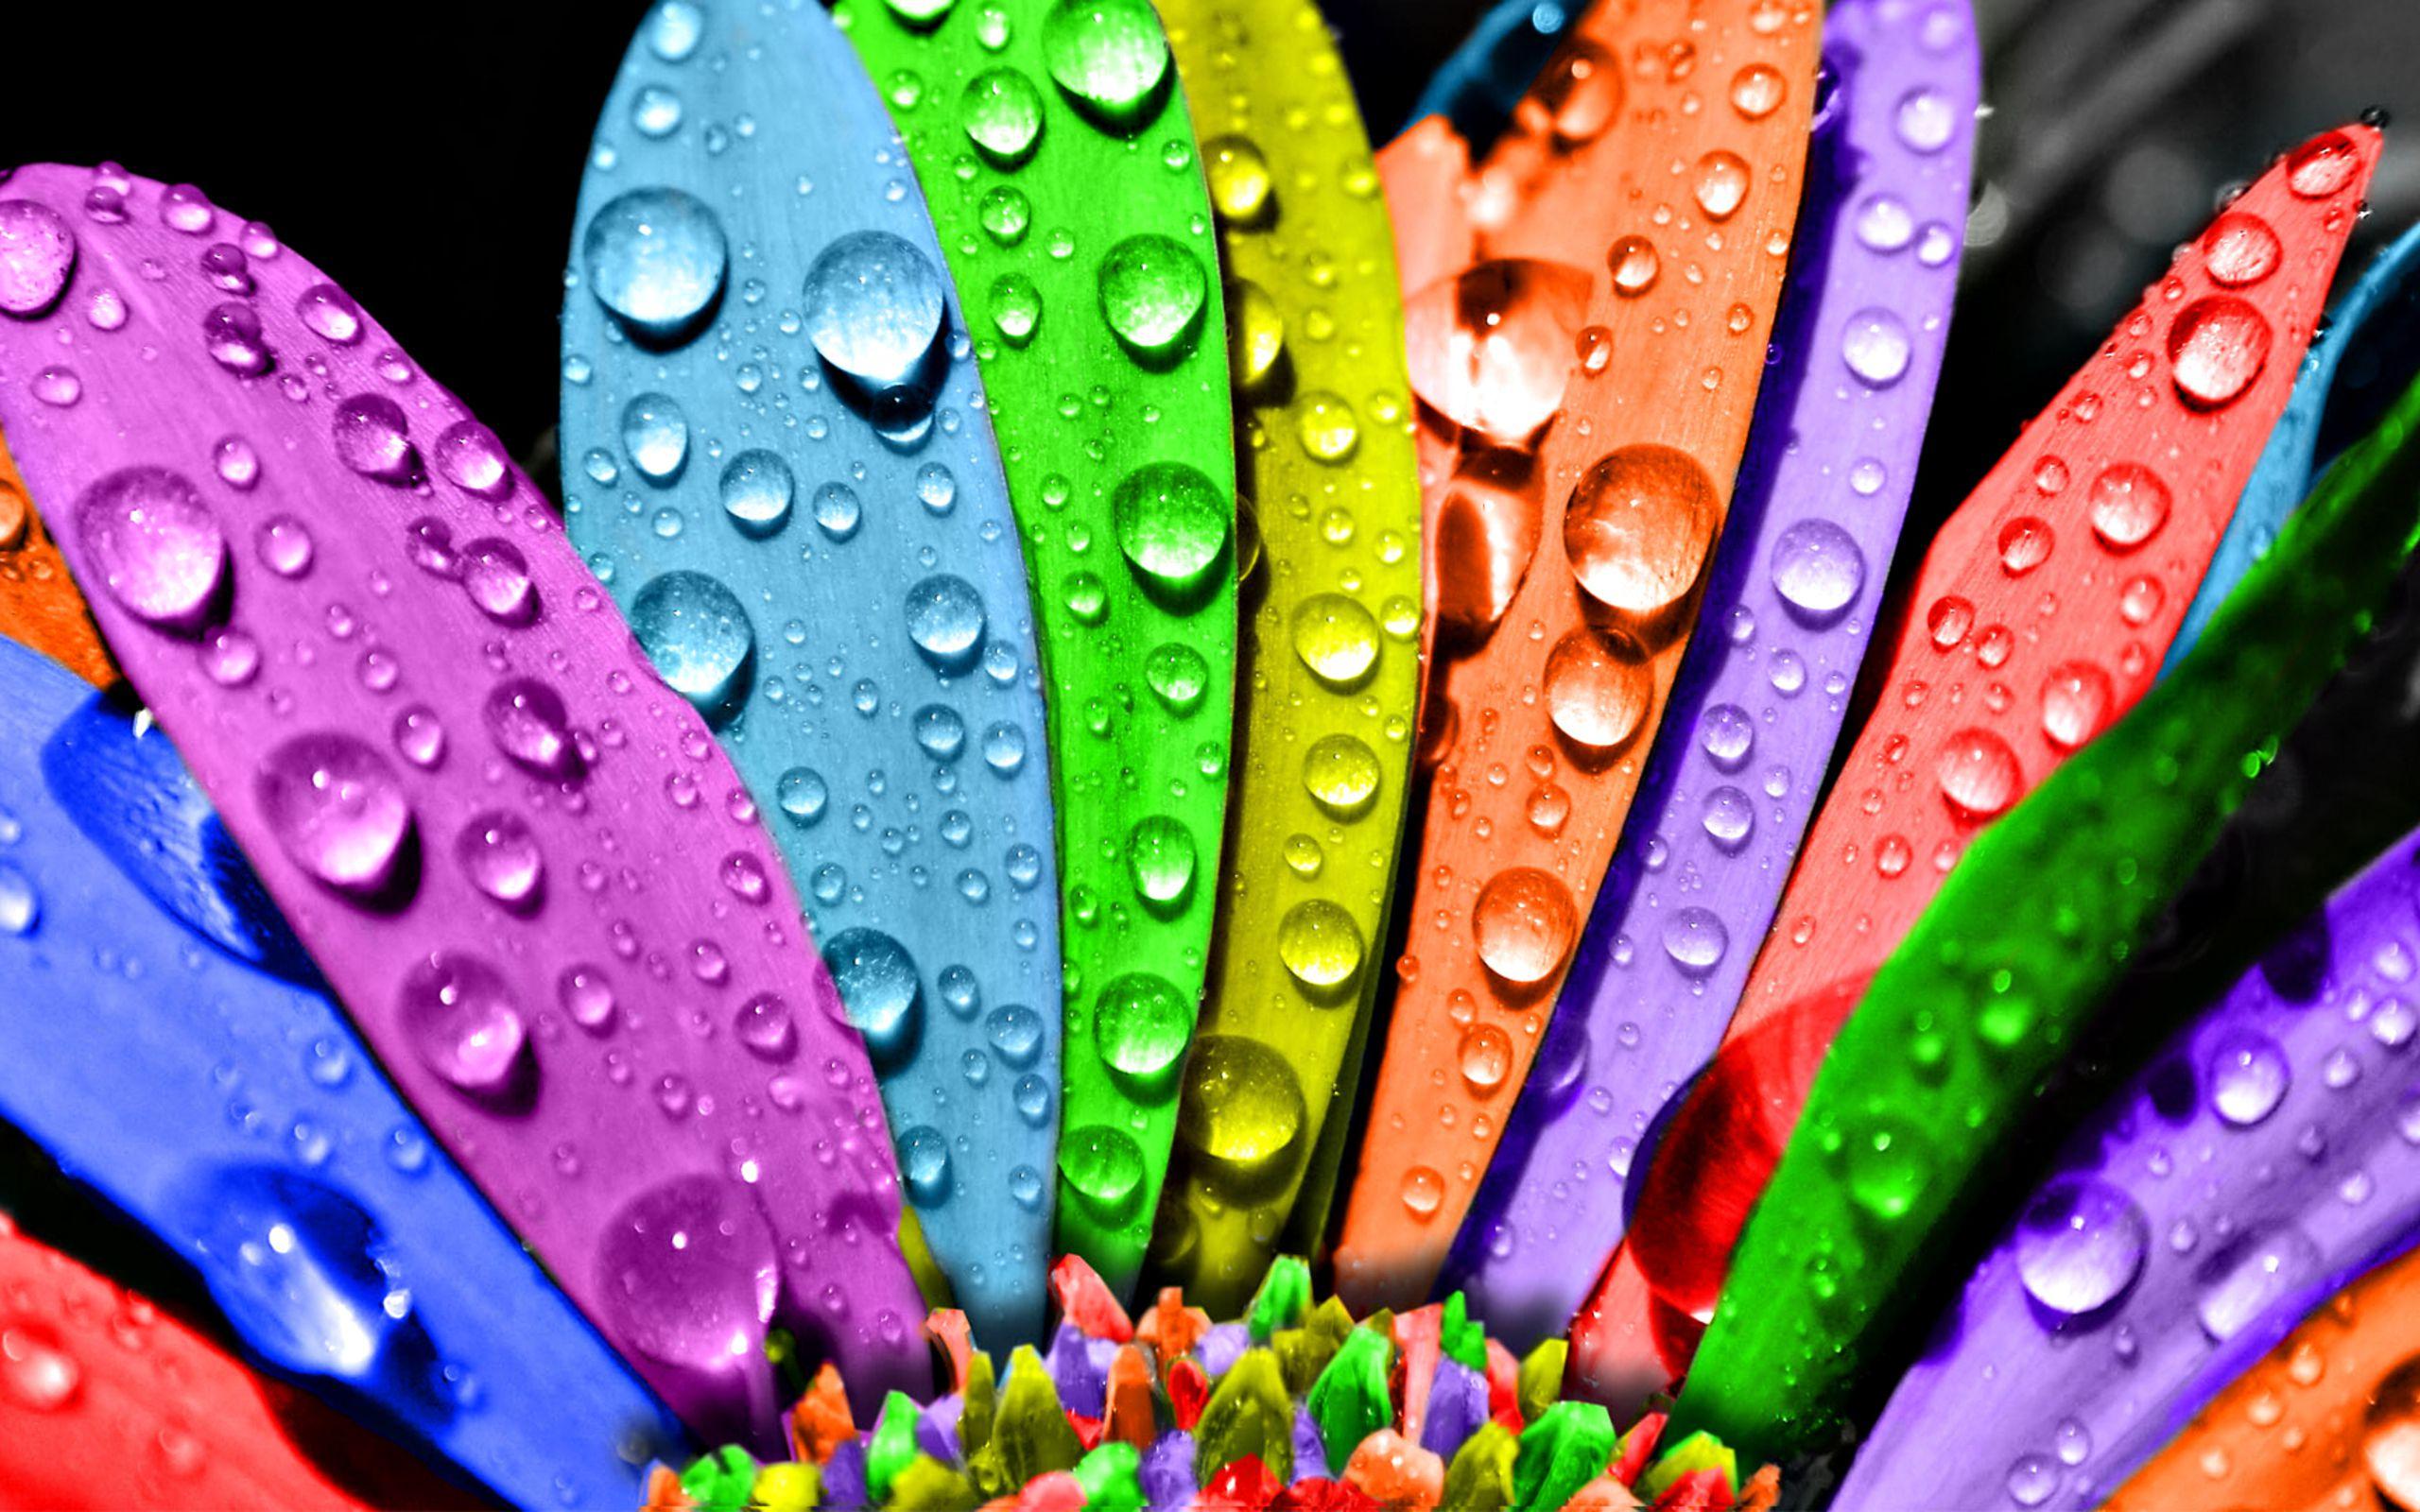 2560 x 1600 · jpeg - Colorful Wallpapers | Best Wallpapers